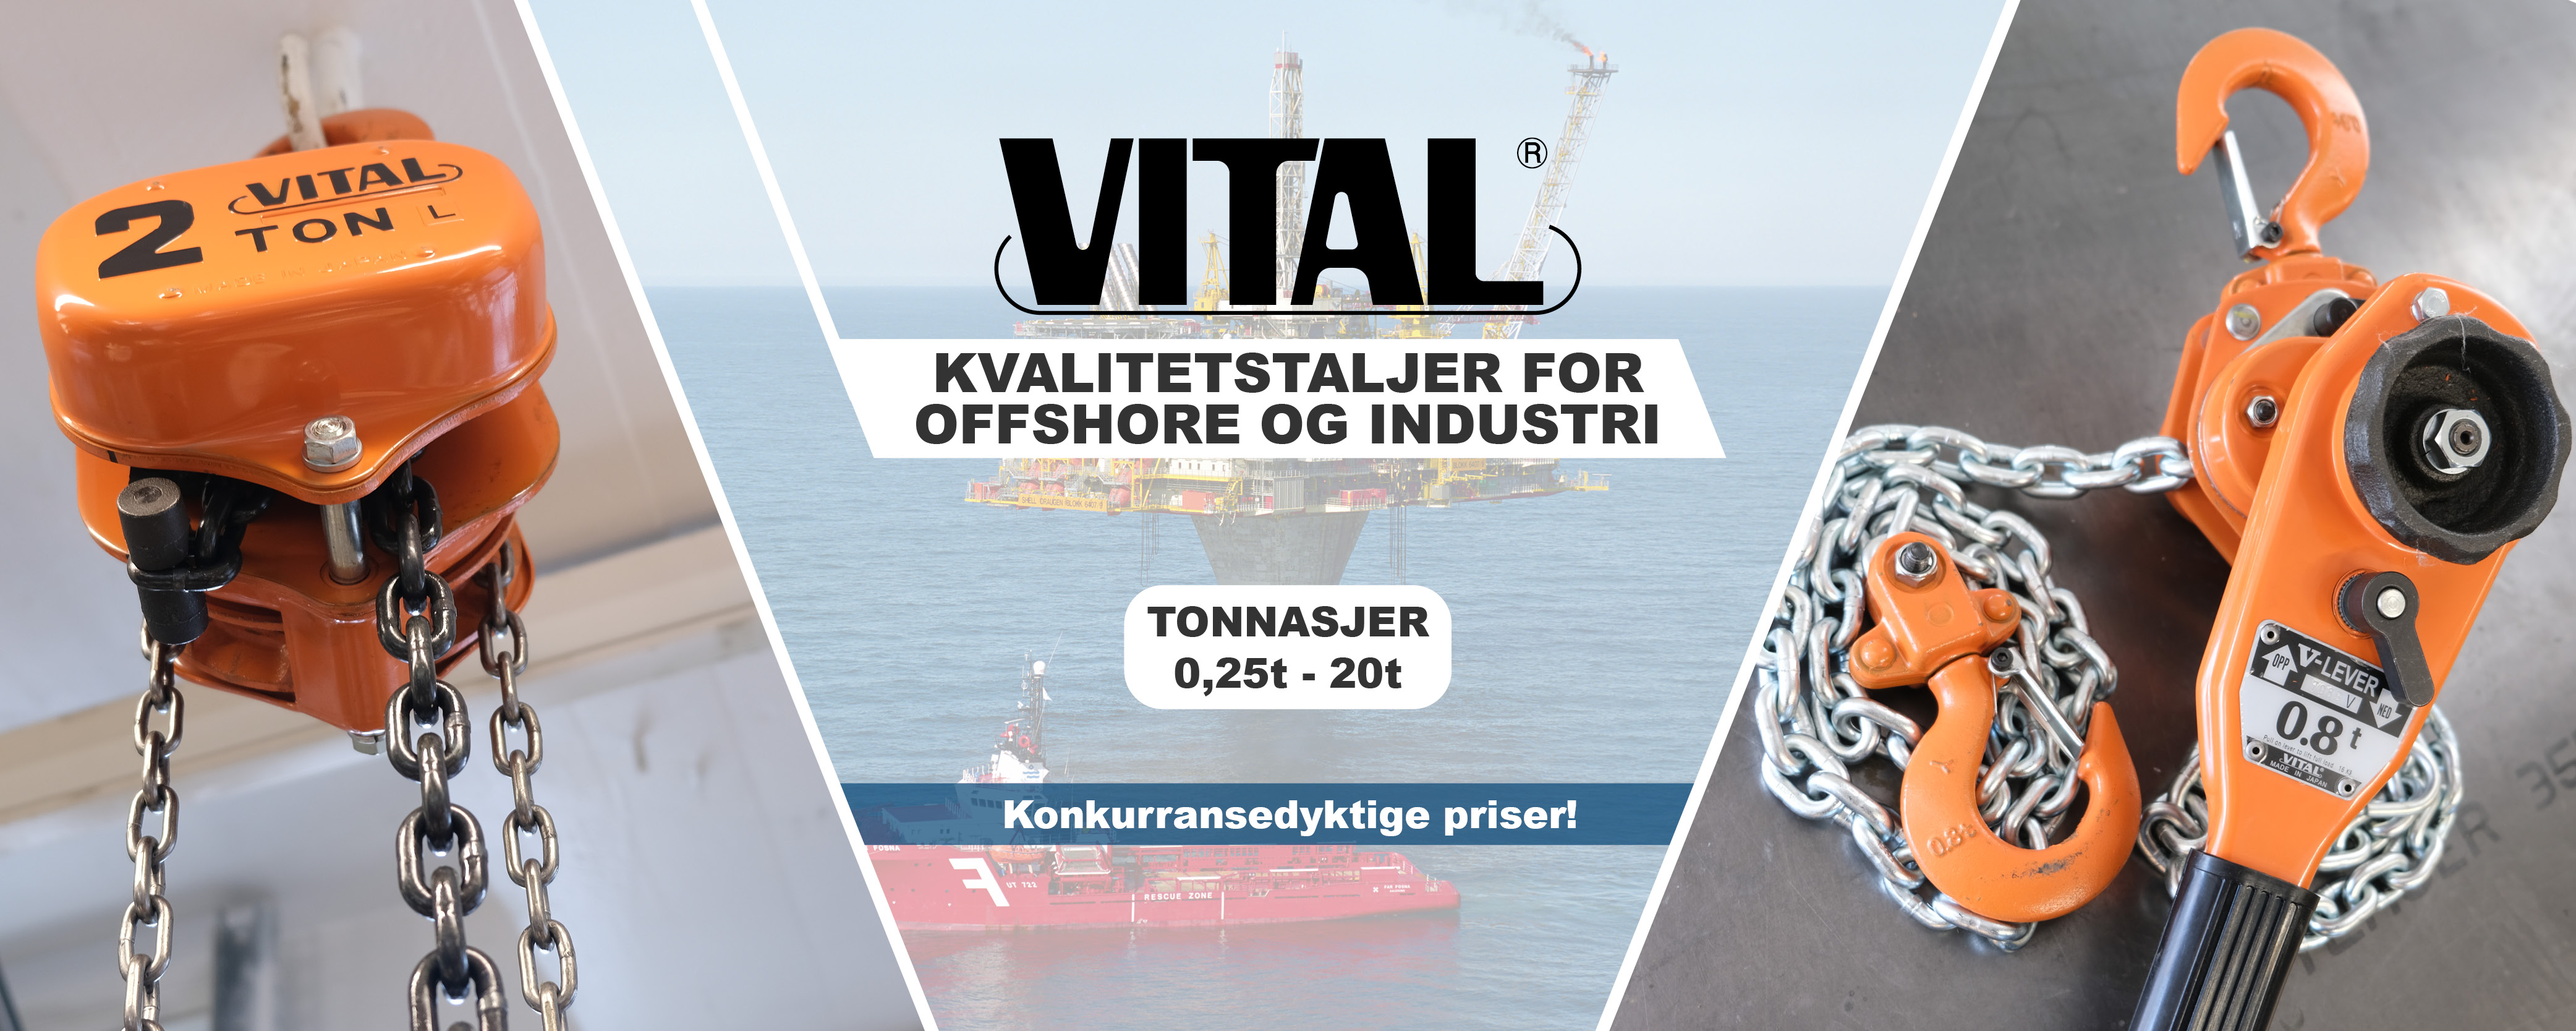 Vital hoists for offshore and any industry